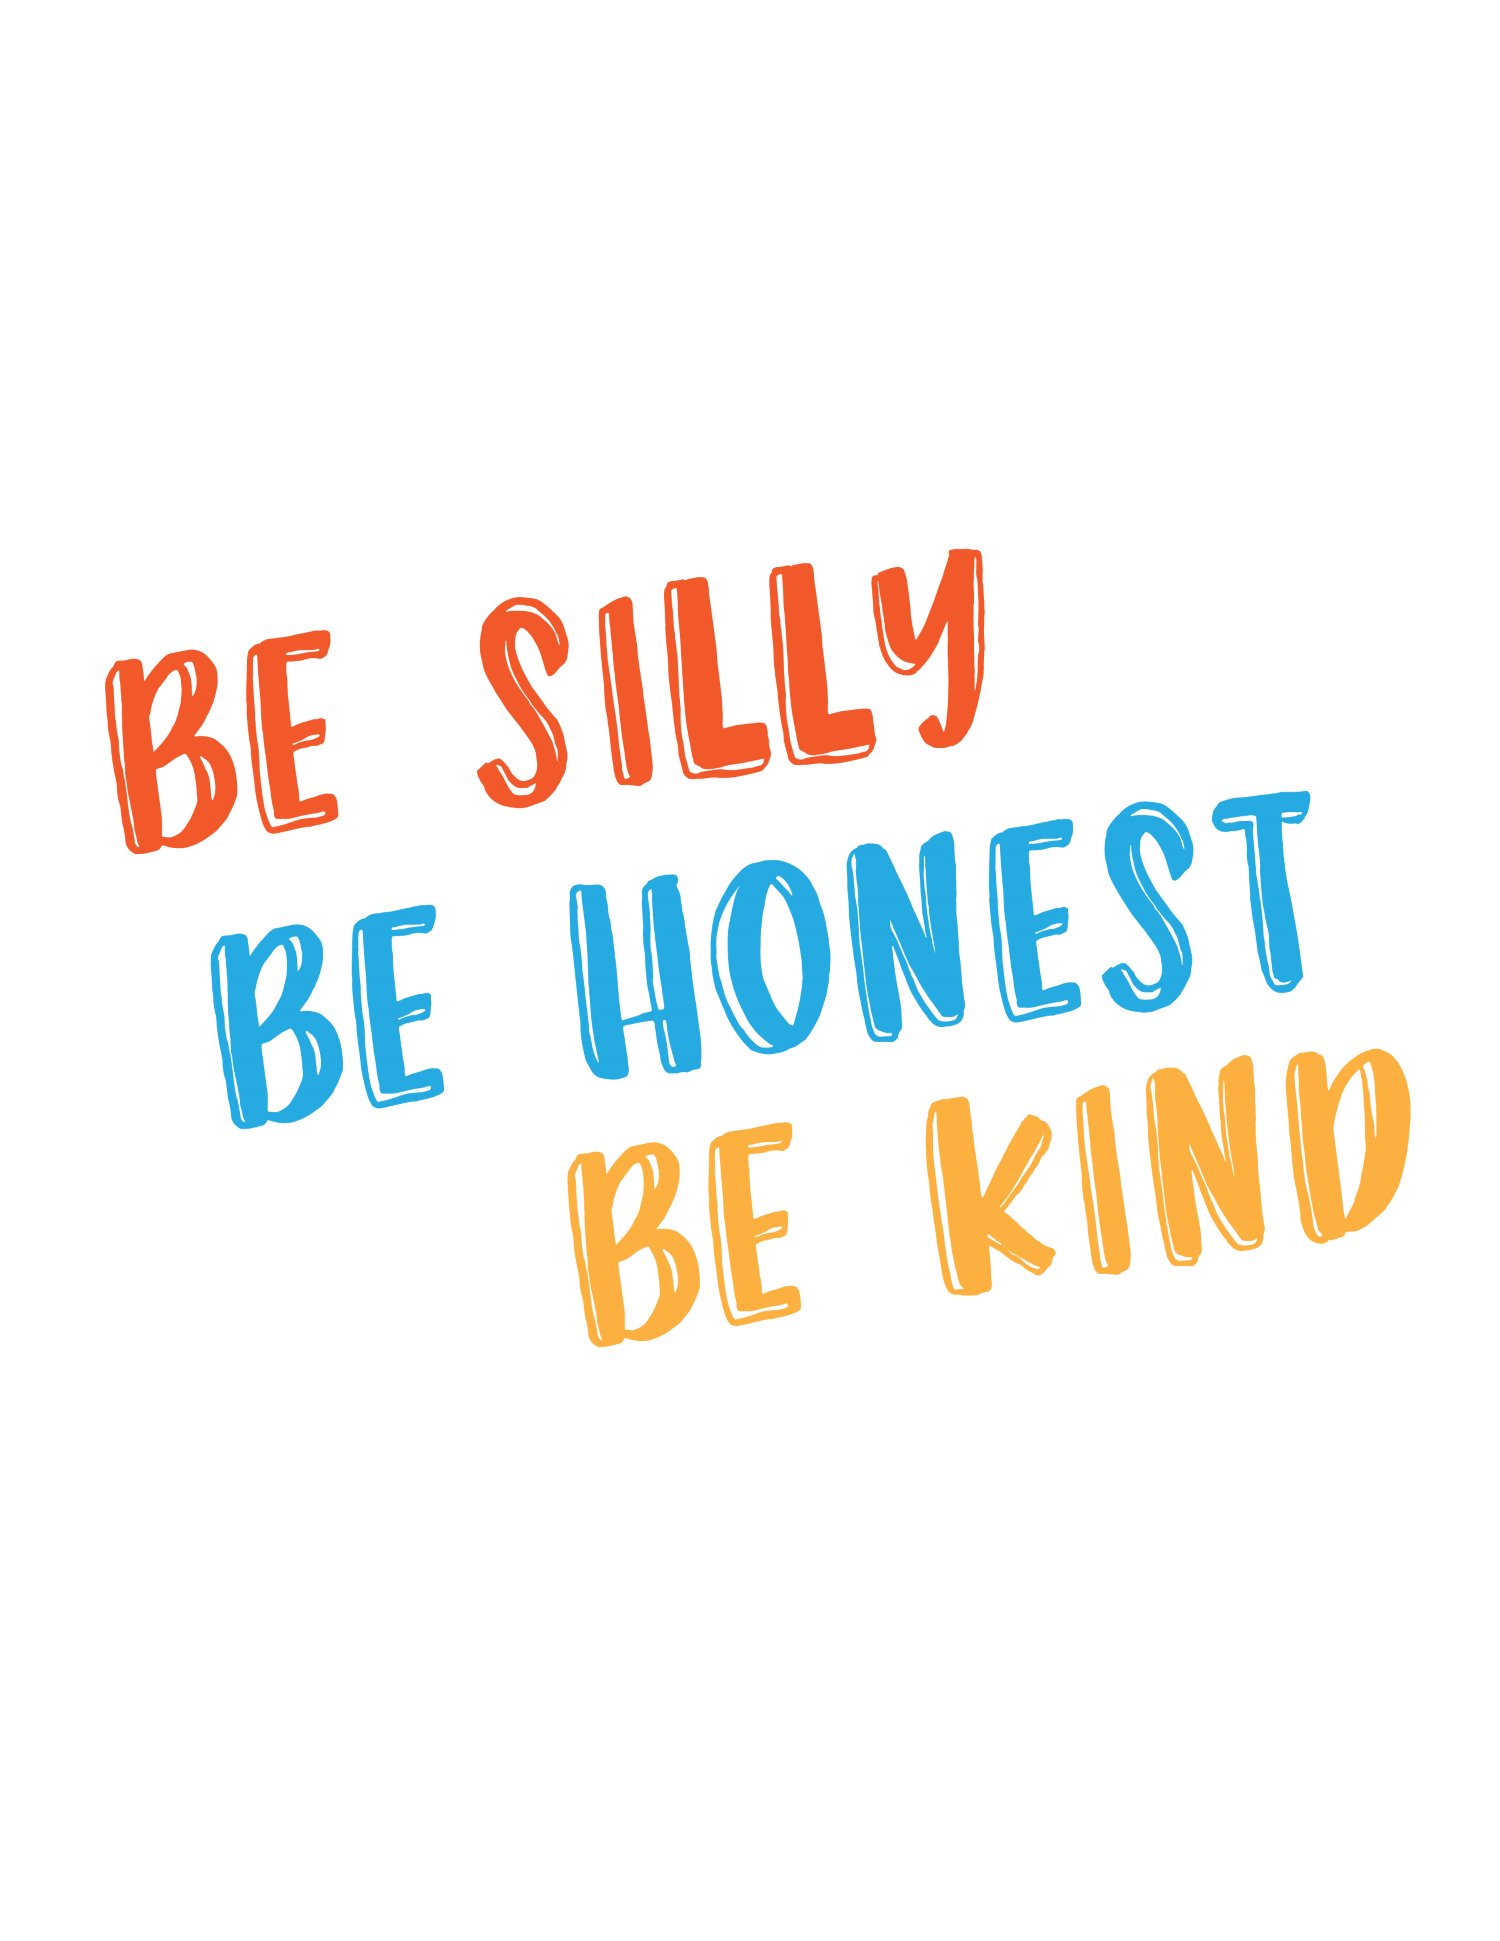 Be Kind,Be Silly,Be Silly Be Honest,Instant Download,Printable Wall Art,Printable Art,Be Honest,Silly,Funny,Home Decor,Wall Art,Dorm Decor